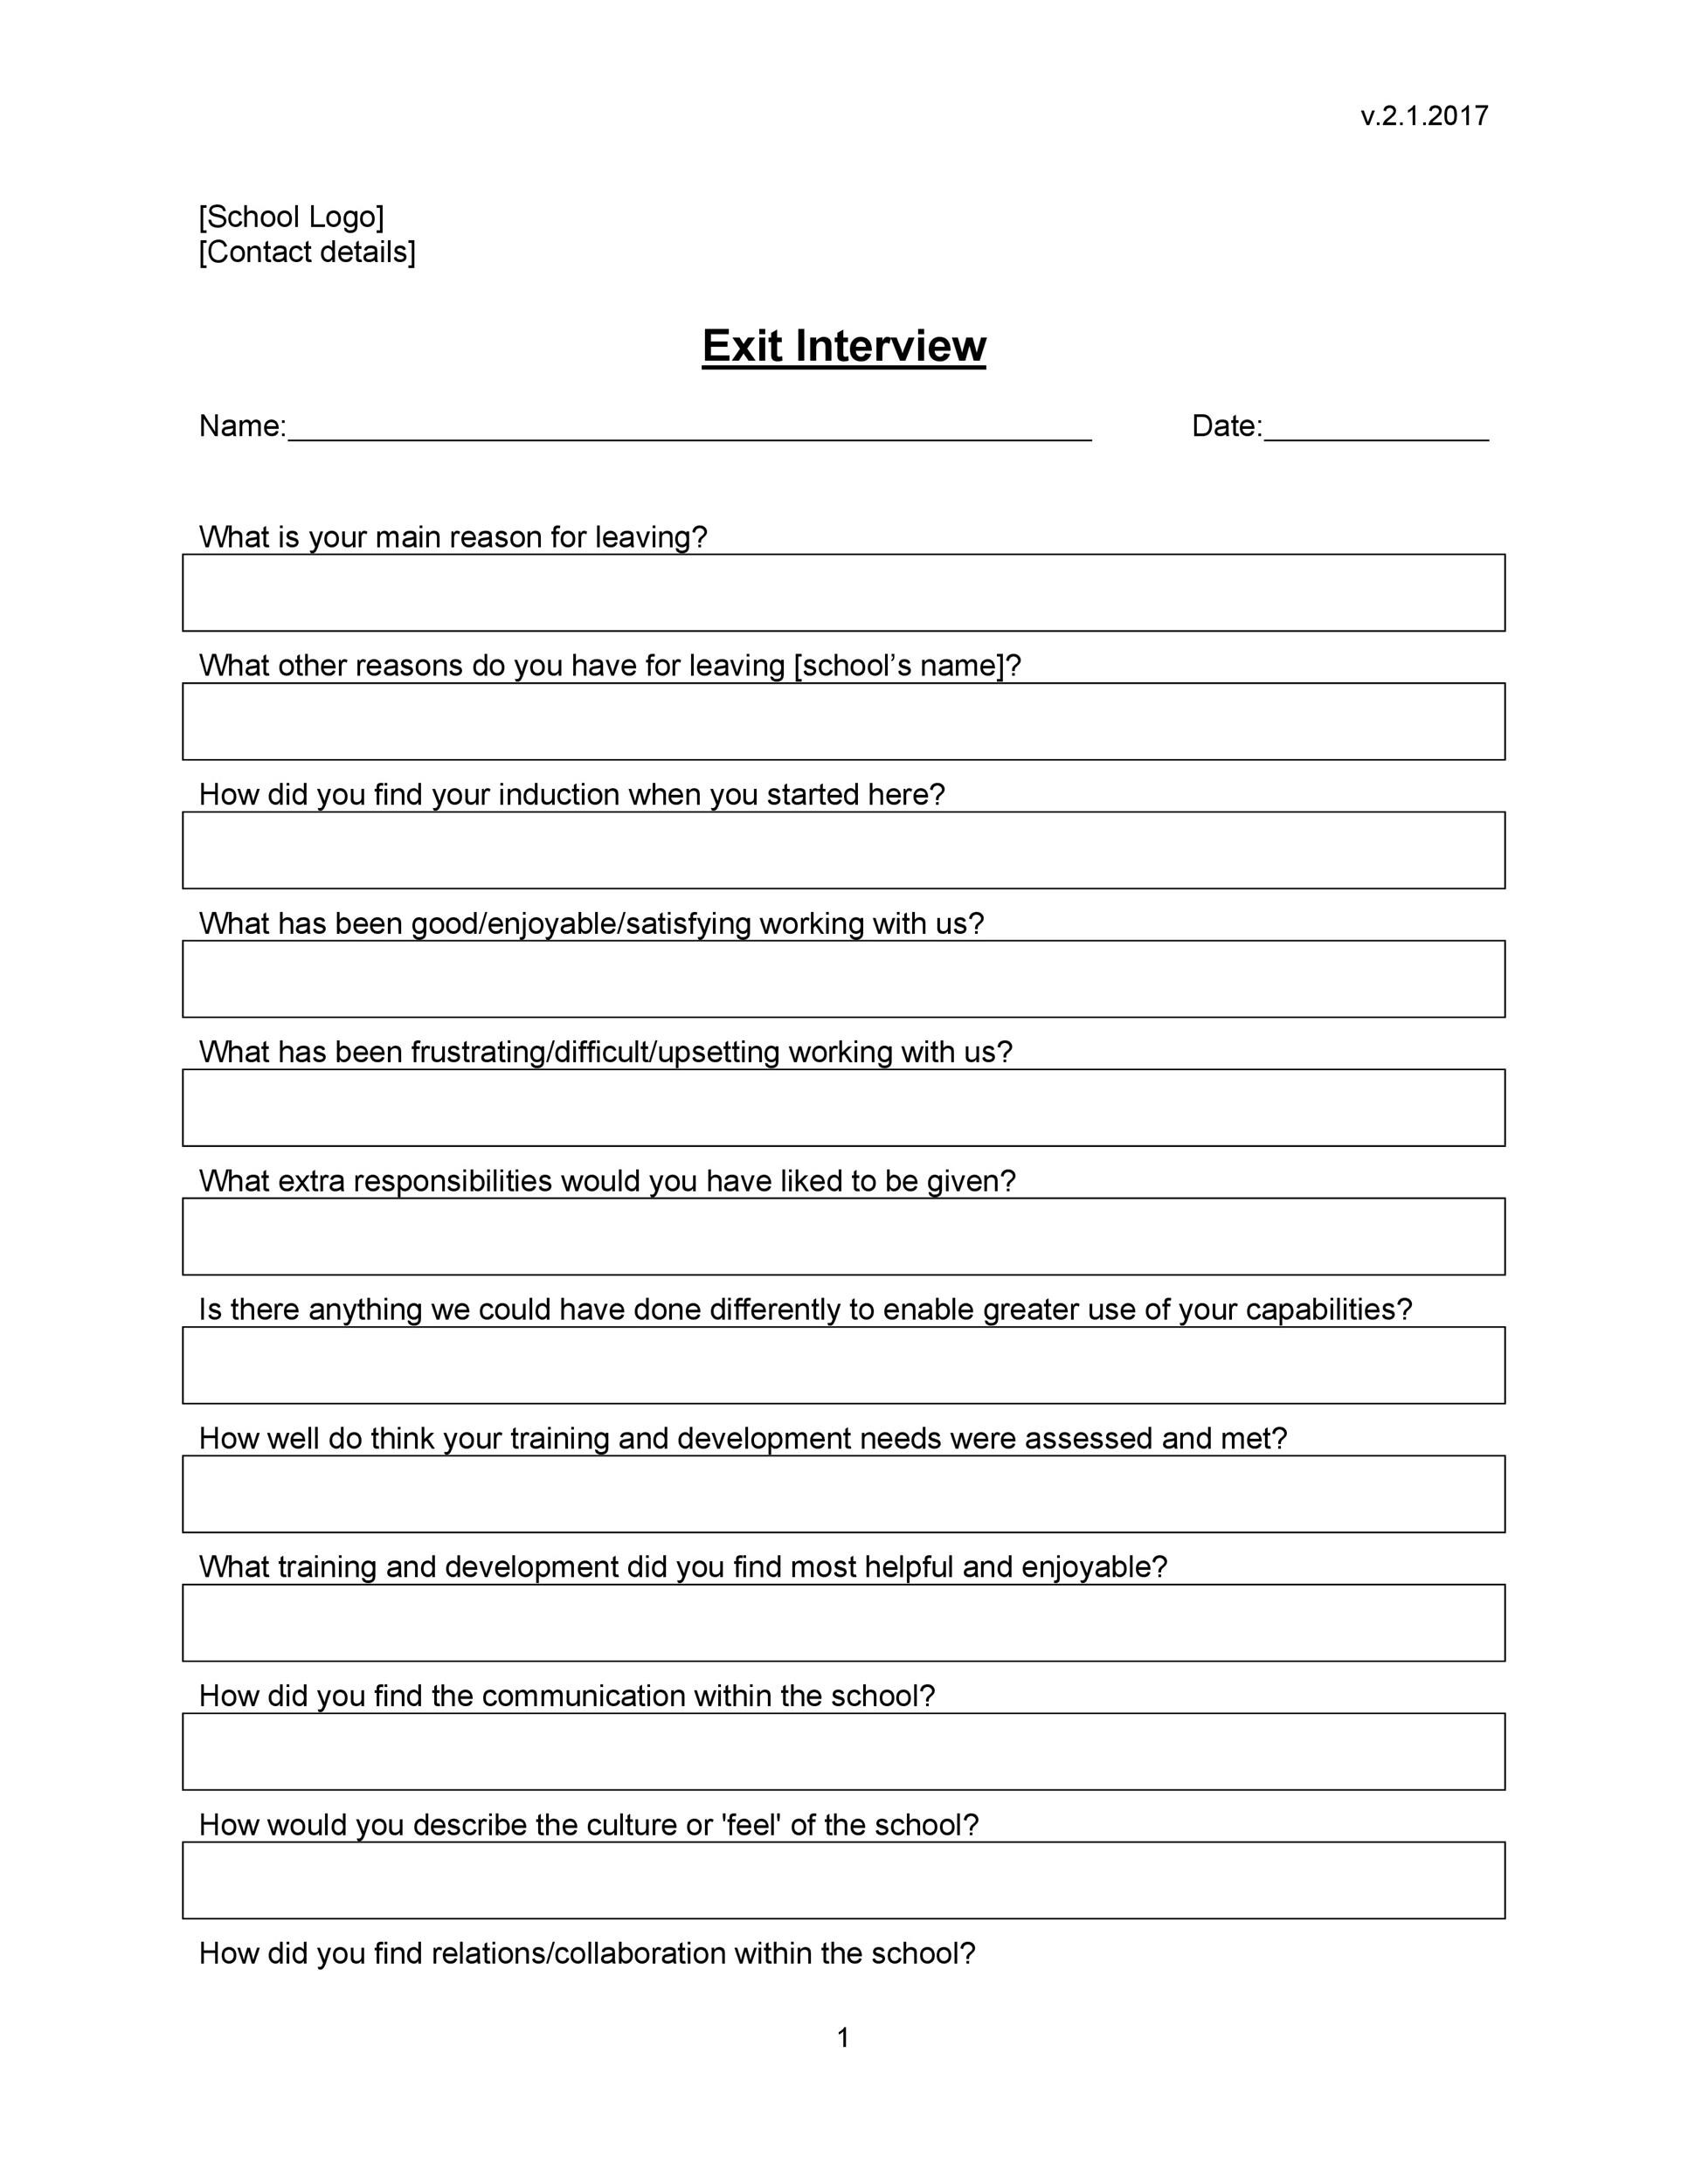 Exit Interview Questions Template